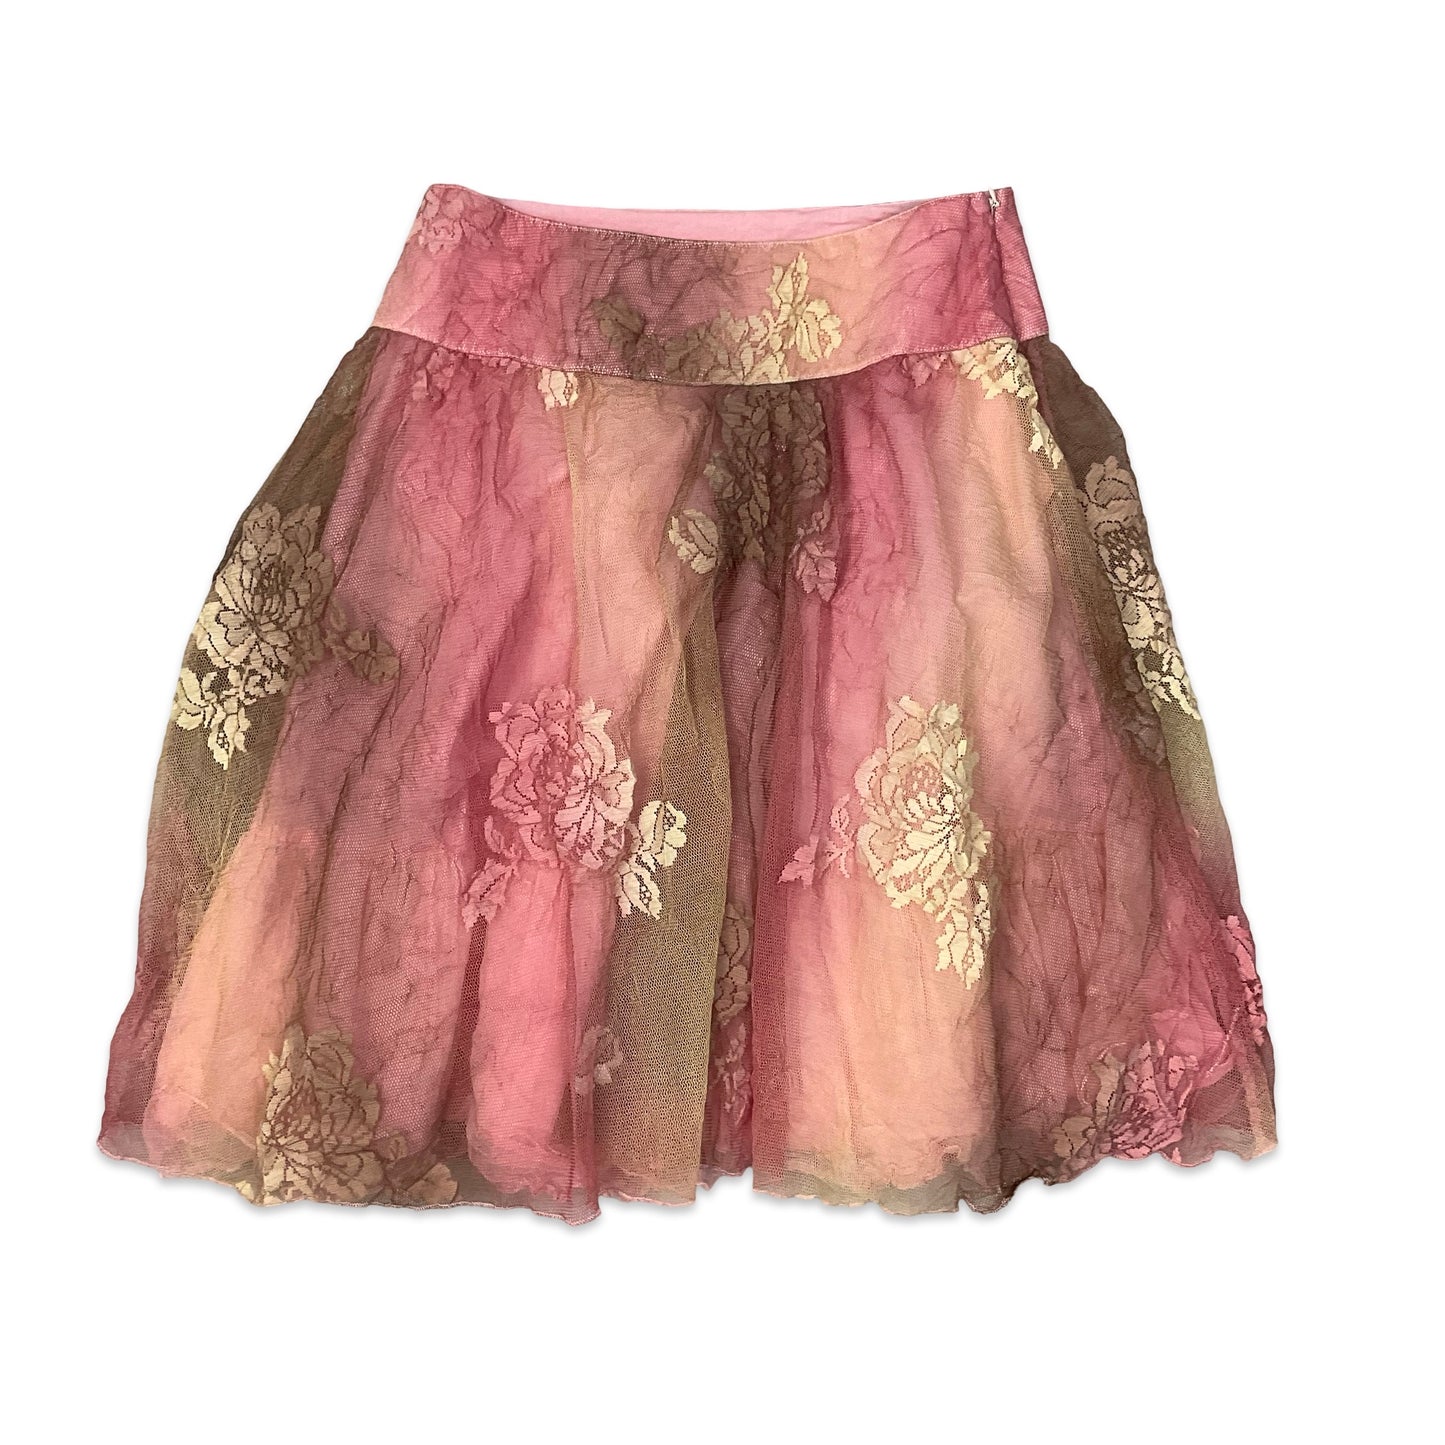 Vintage Pink Floral Puffball Skirt 10